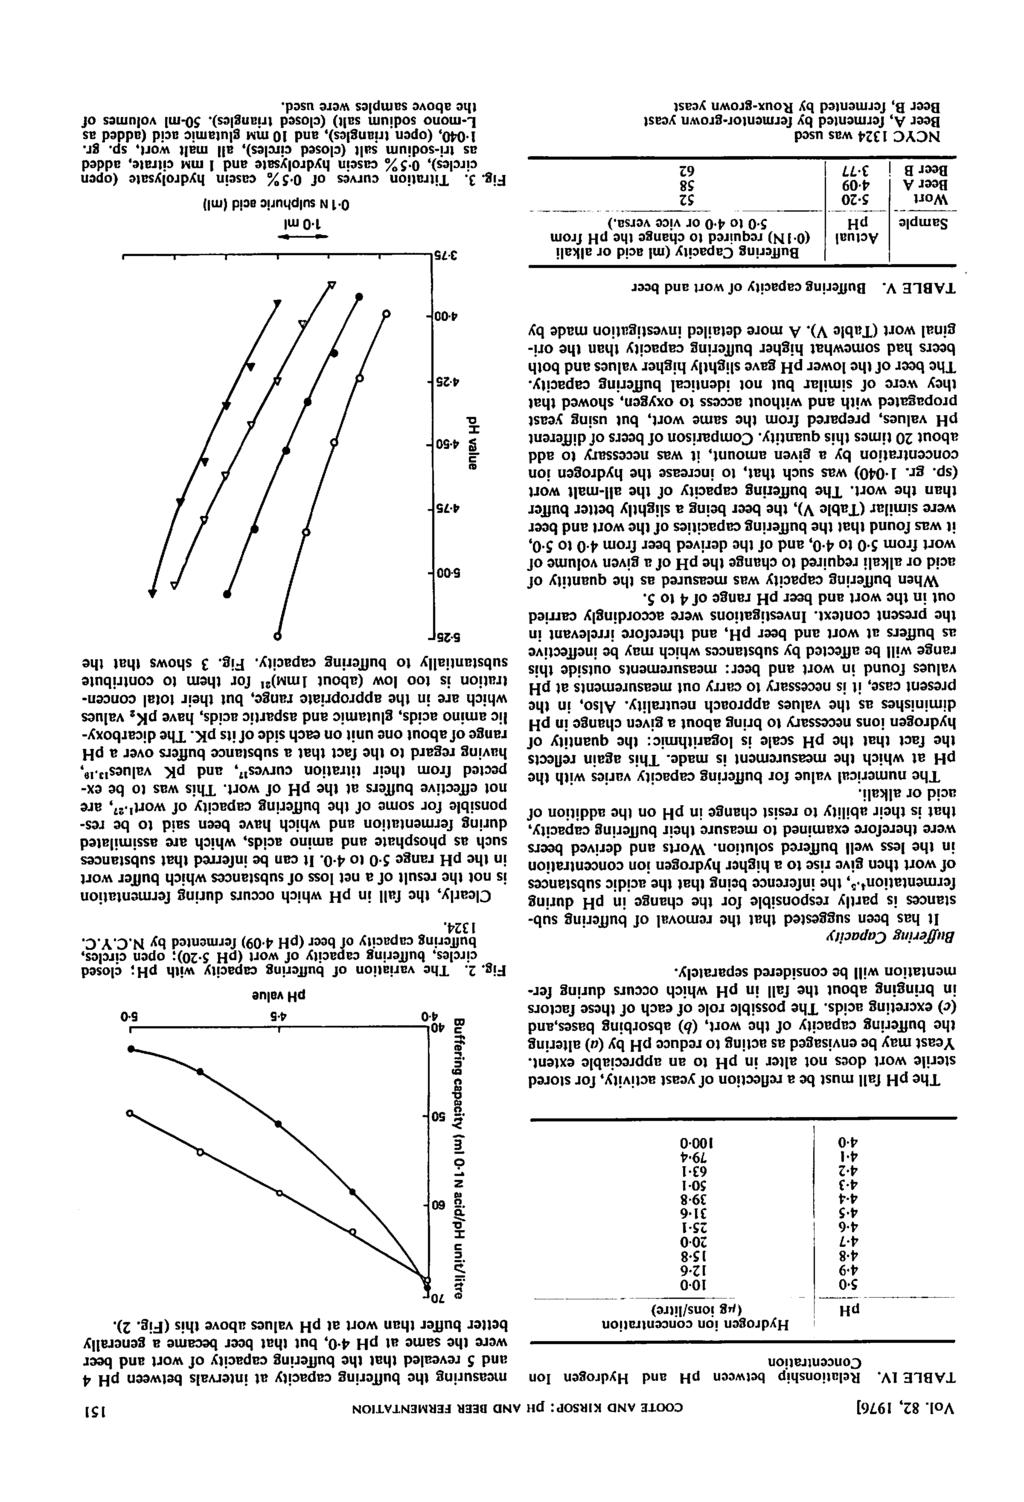 Vol. 82, 19] COOTE AND KISOP: ph AND BEE EMENTATION 1 TABLE IV.